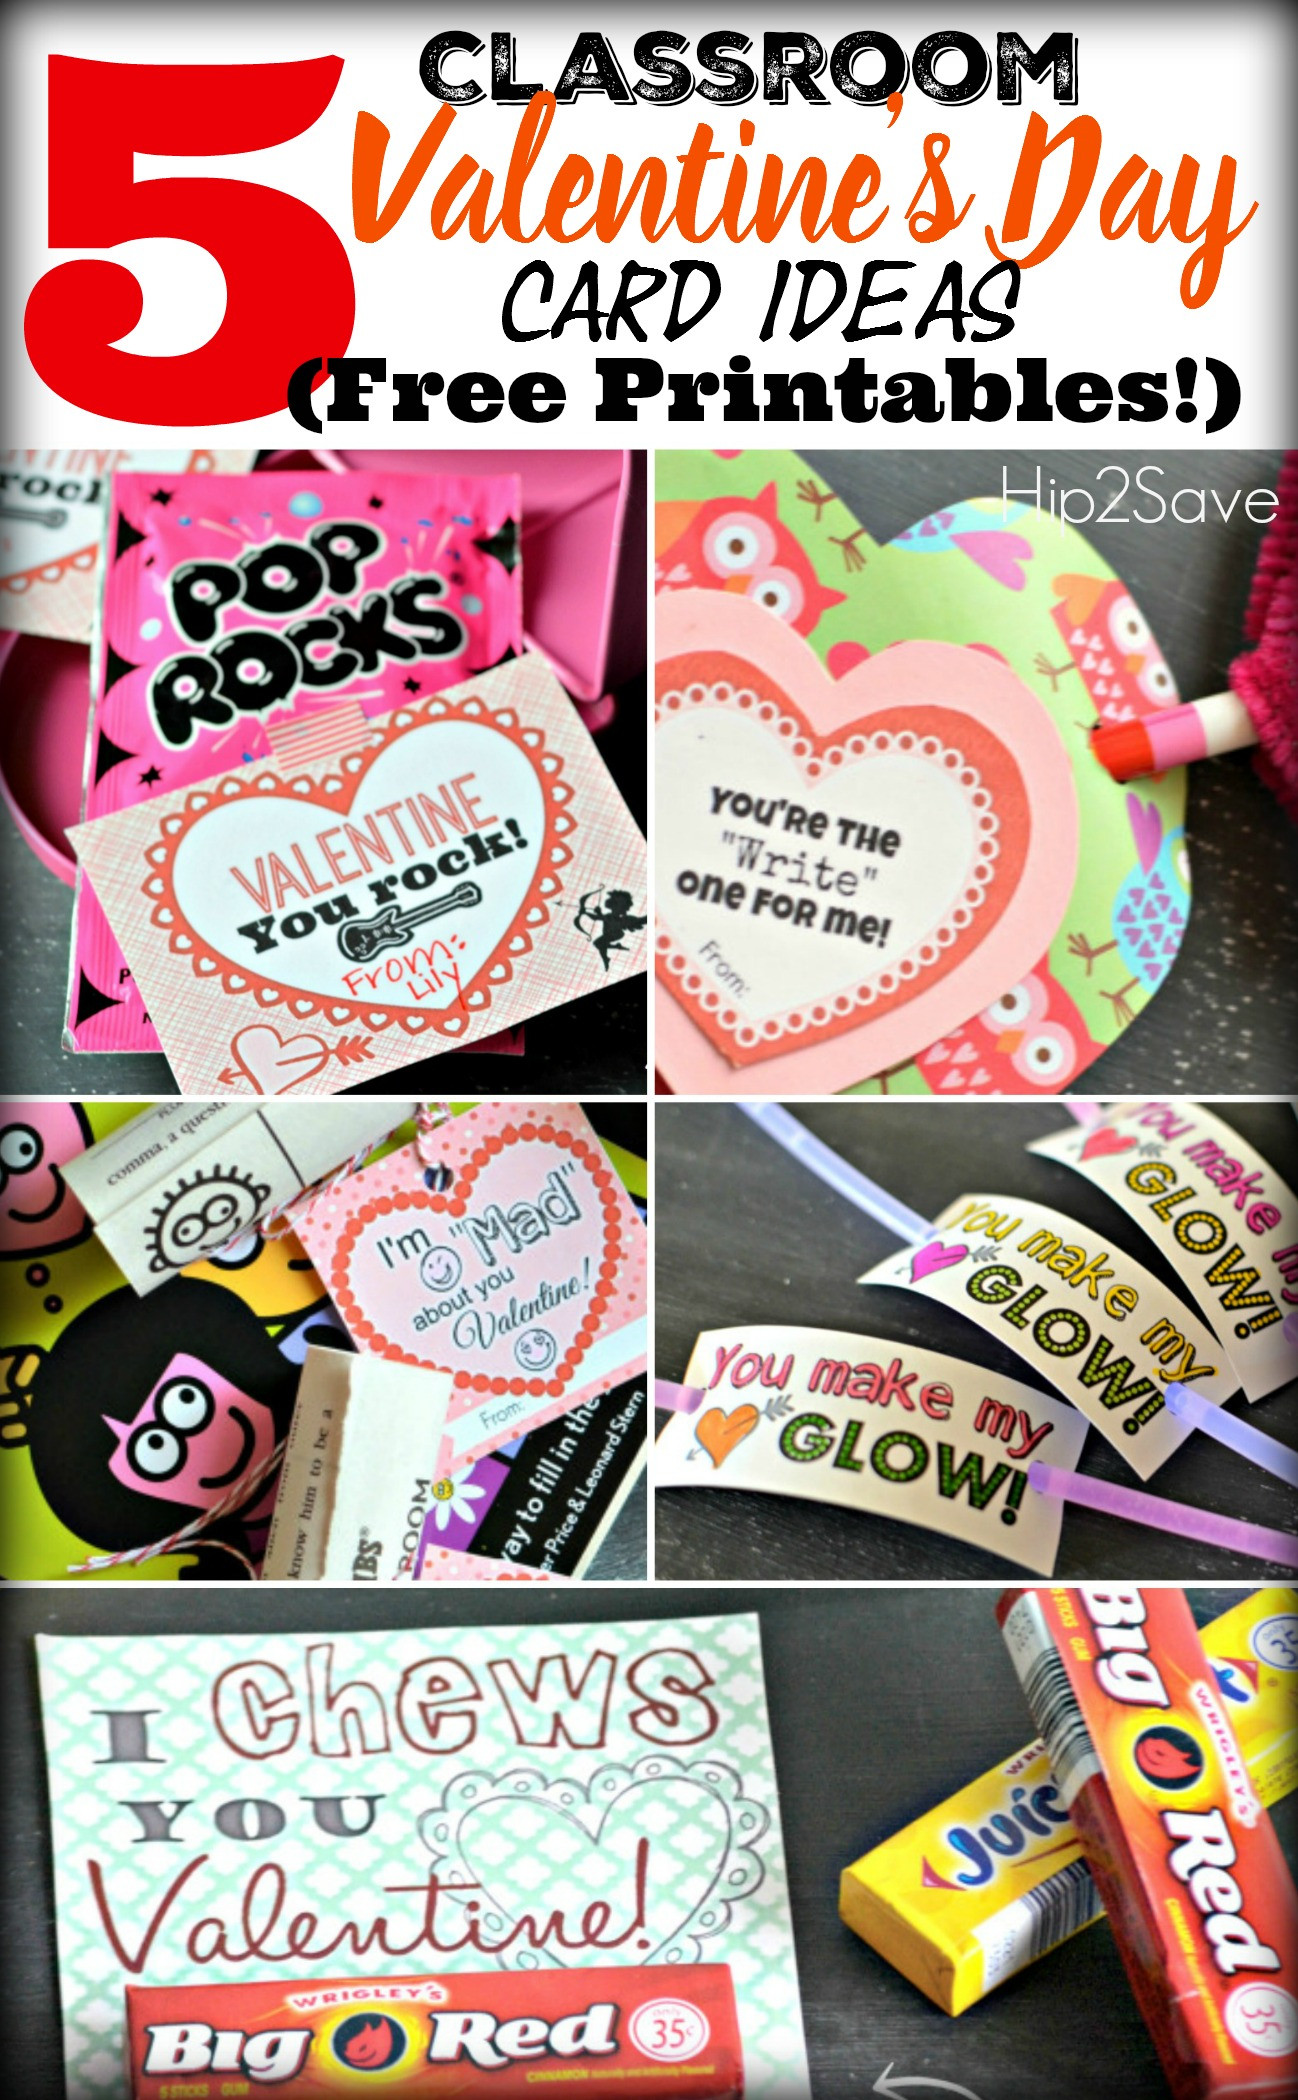 Classroom Valentine Gift Ideas
 FIVE Classroom Valentine s Day Card Ideas With Free